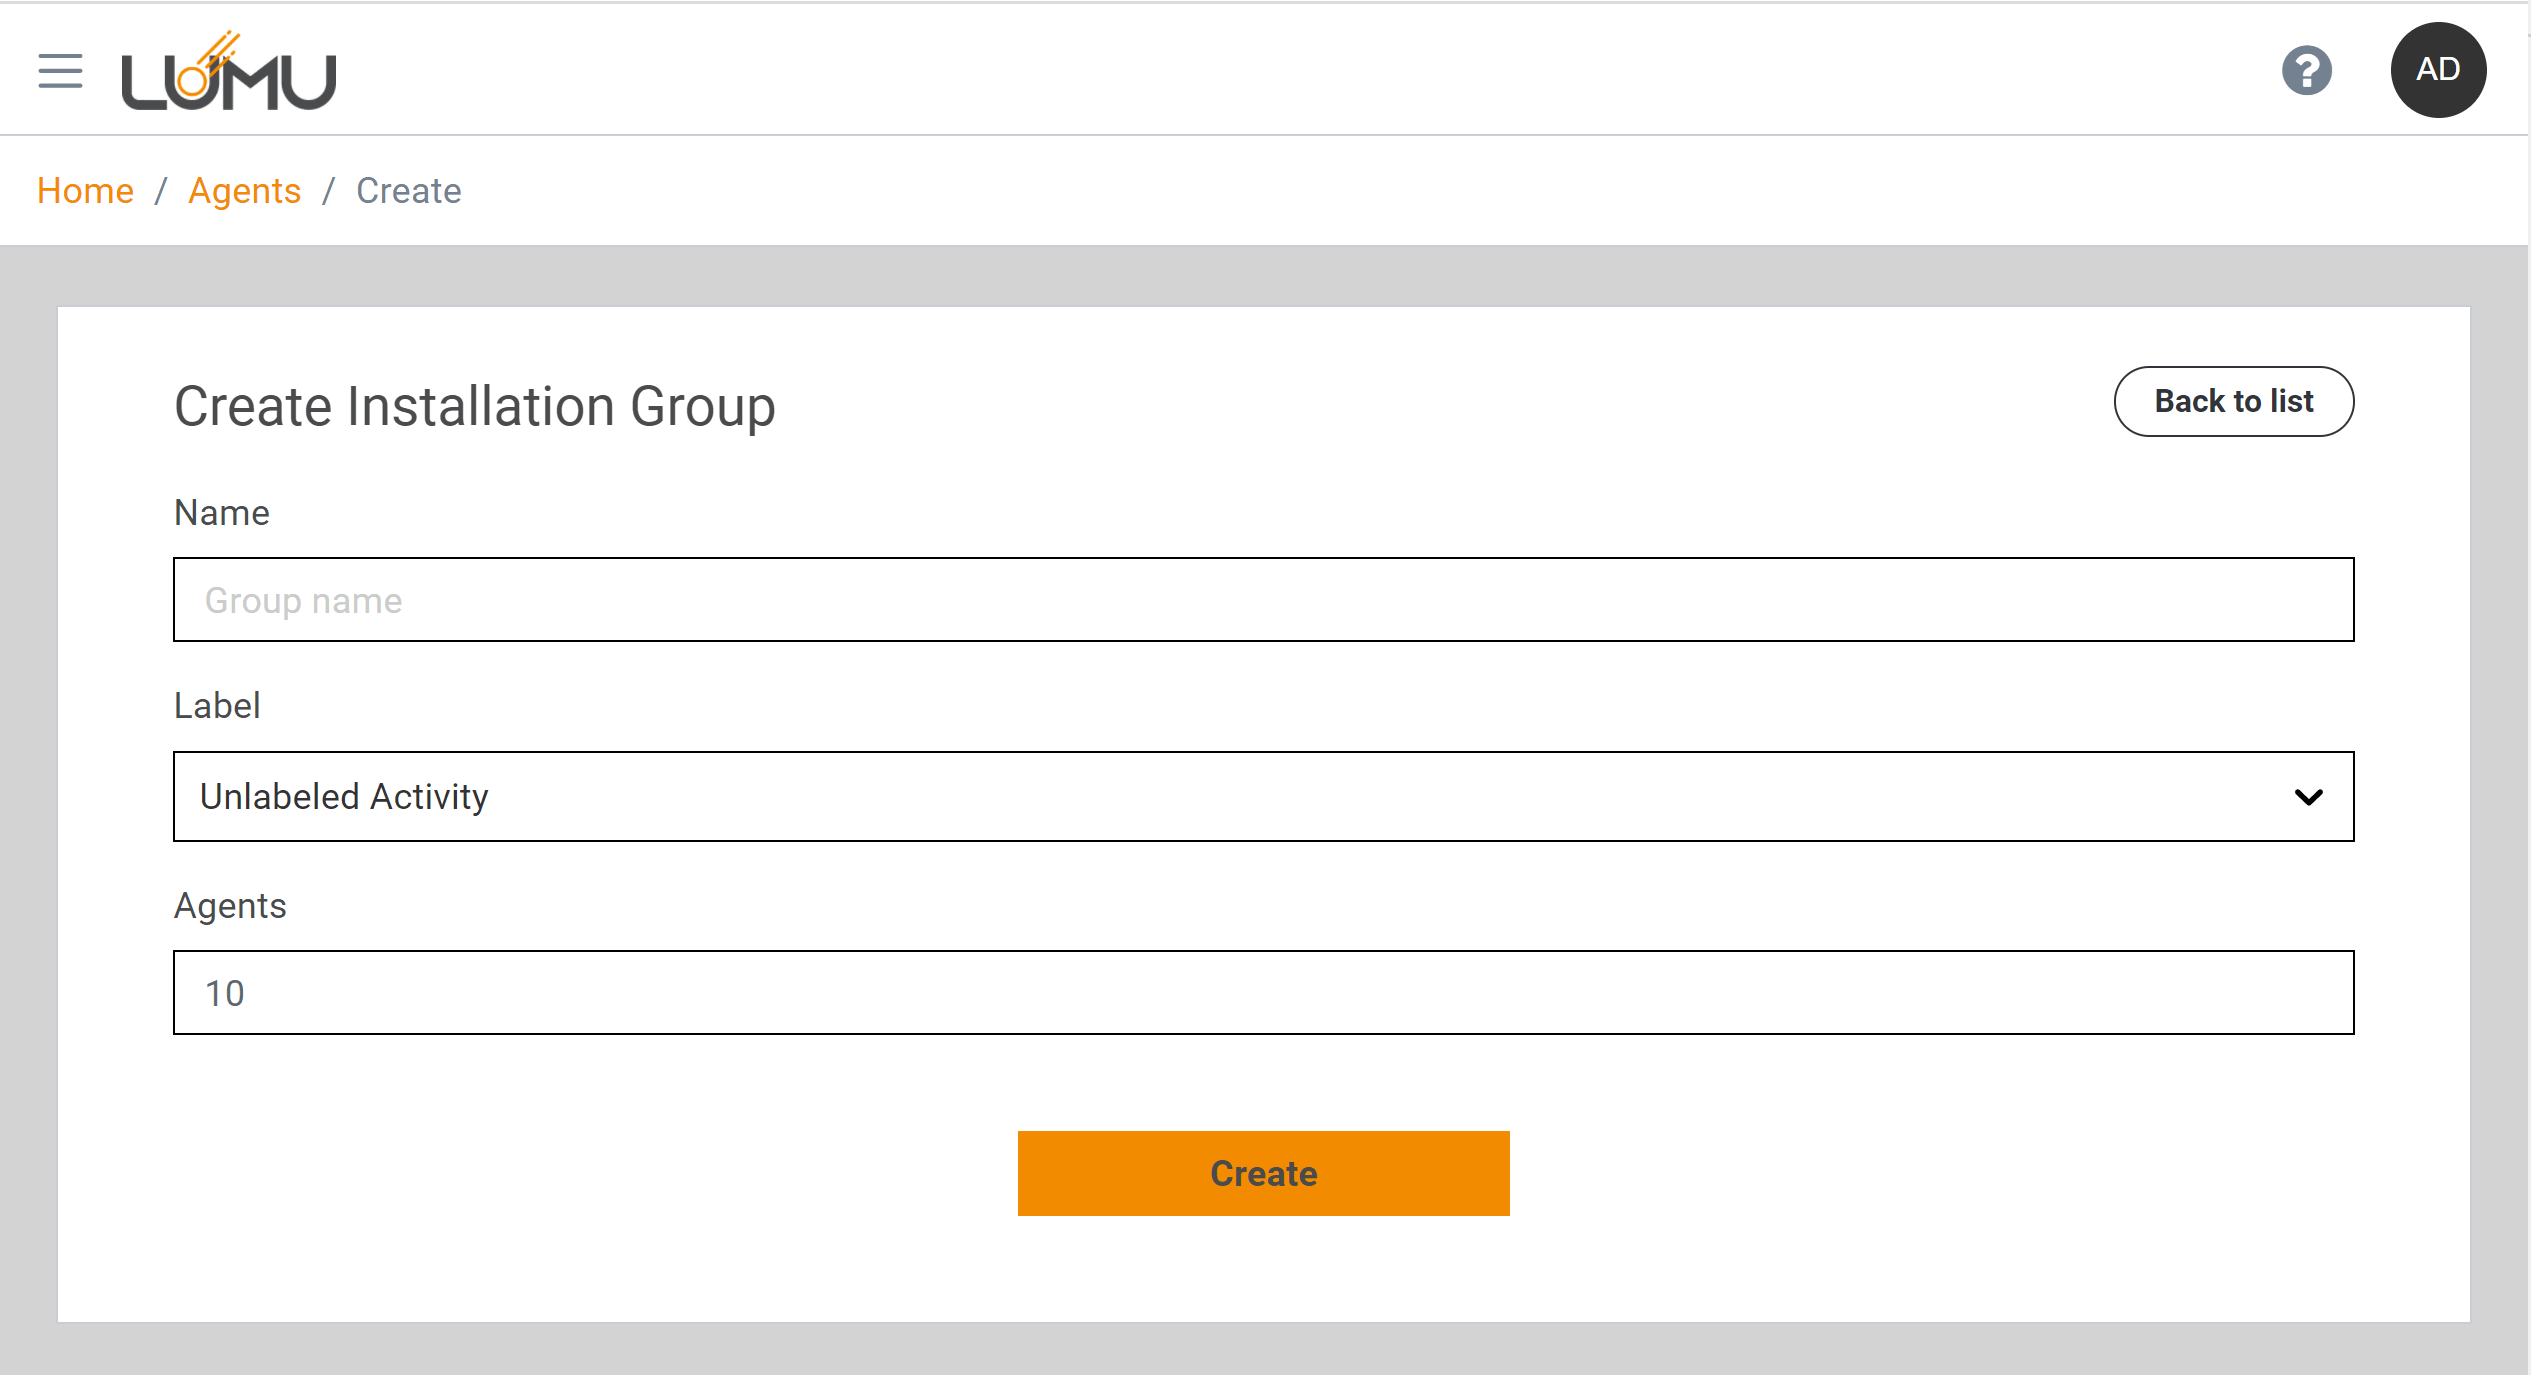 Creating an installation group